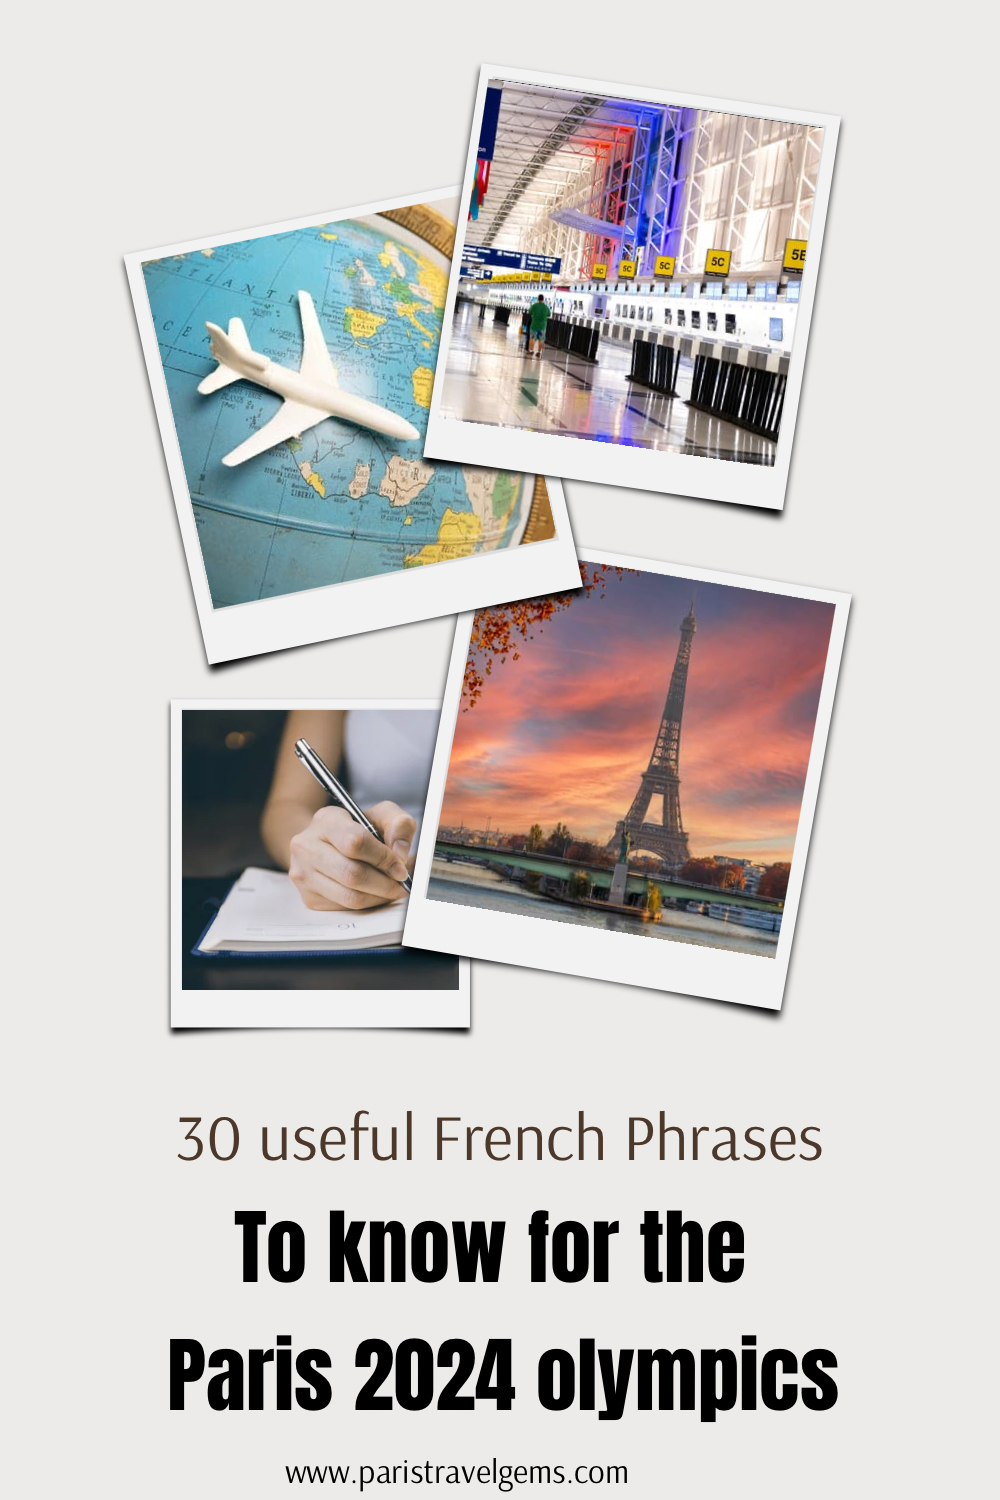 30 Useful French Phrases to Know for Paris 2024 Olympics